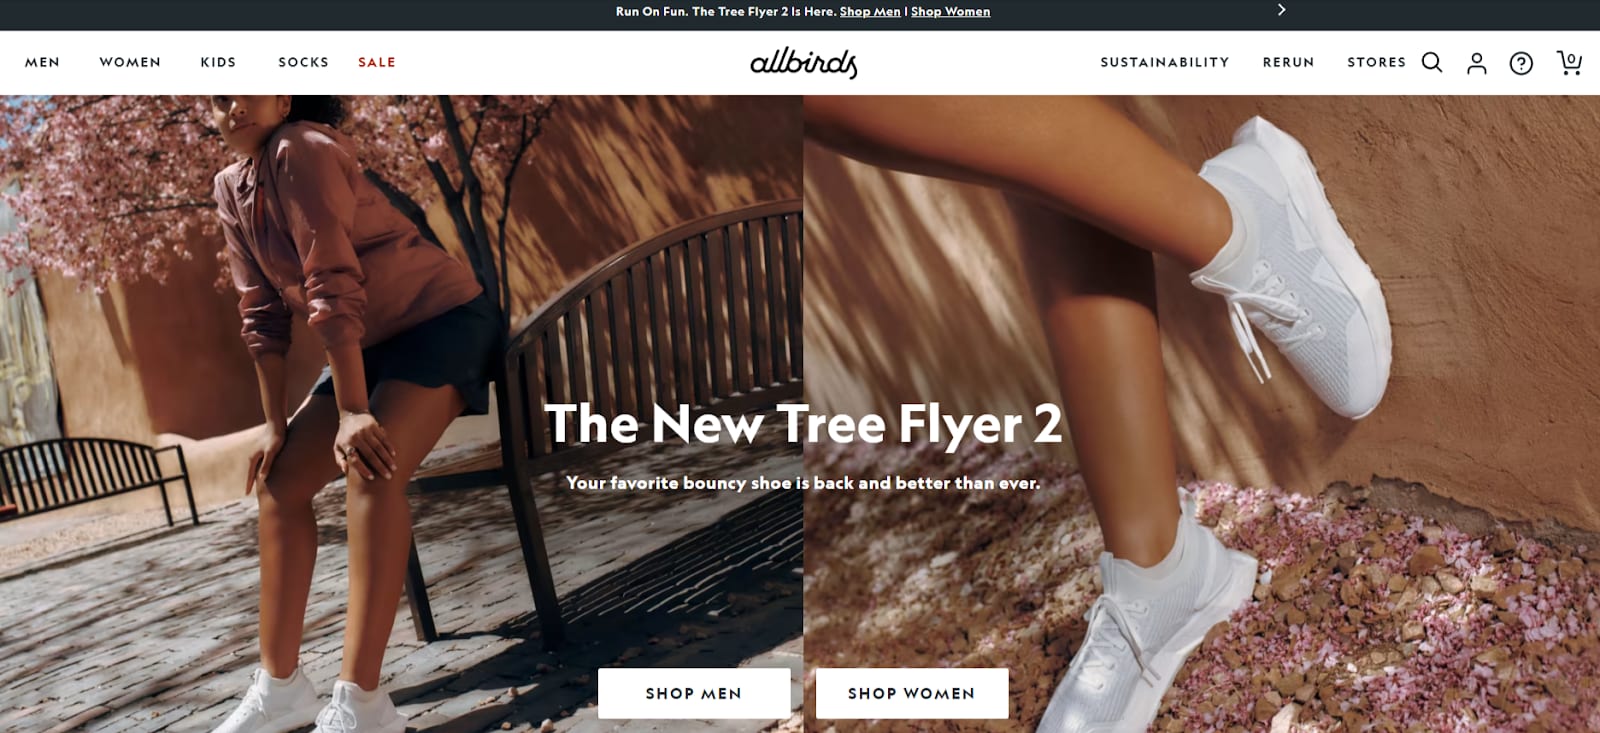 Allbirds, an ecommerce retailer, uses a landing page that redirects visitors to the “Men” or “Women” section of clothing and accessories.